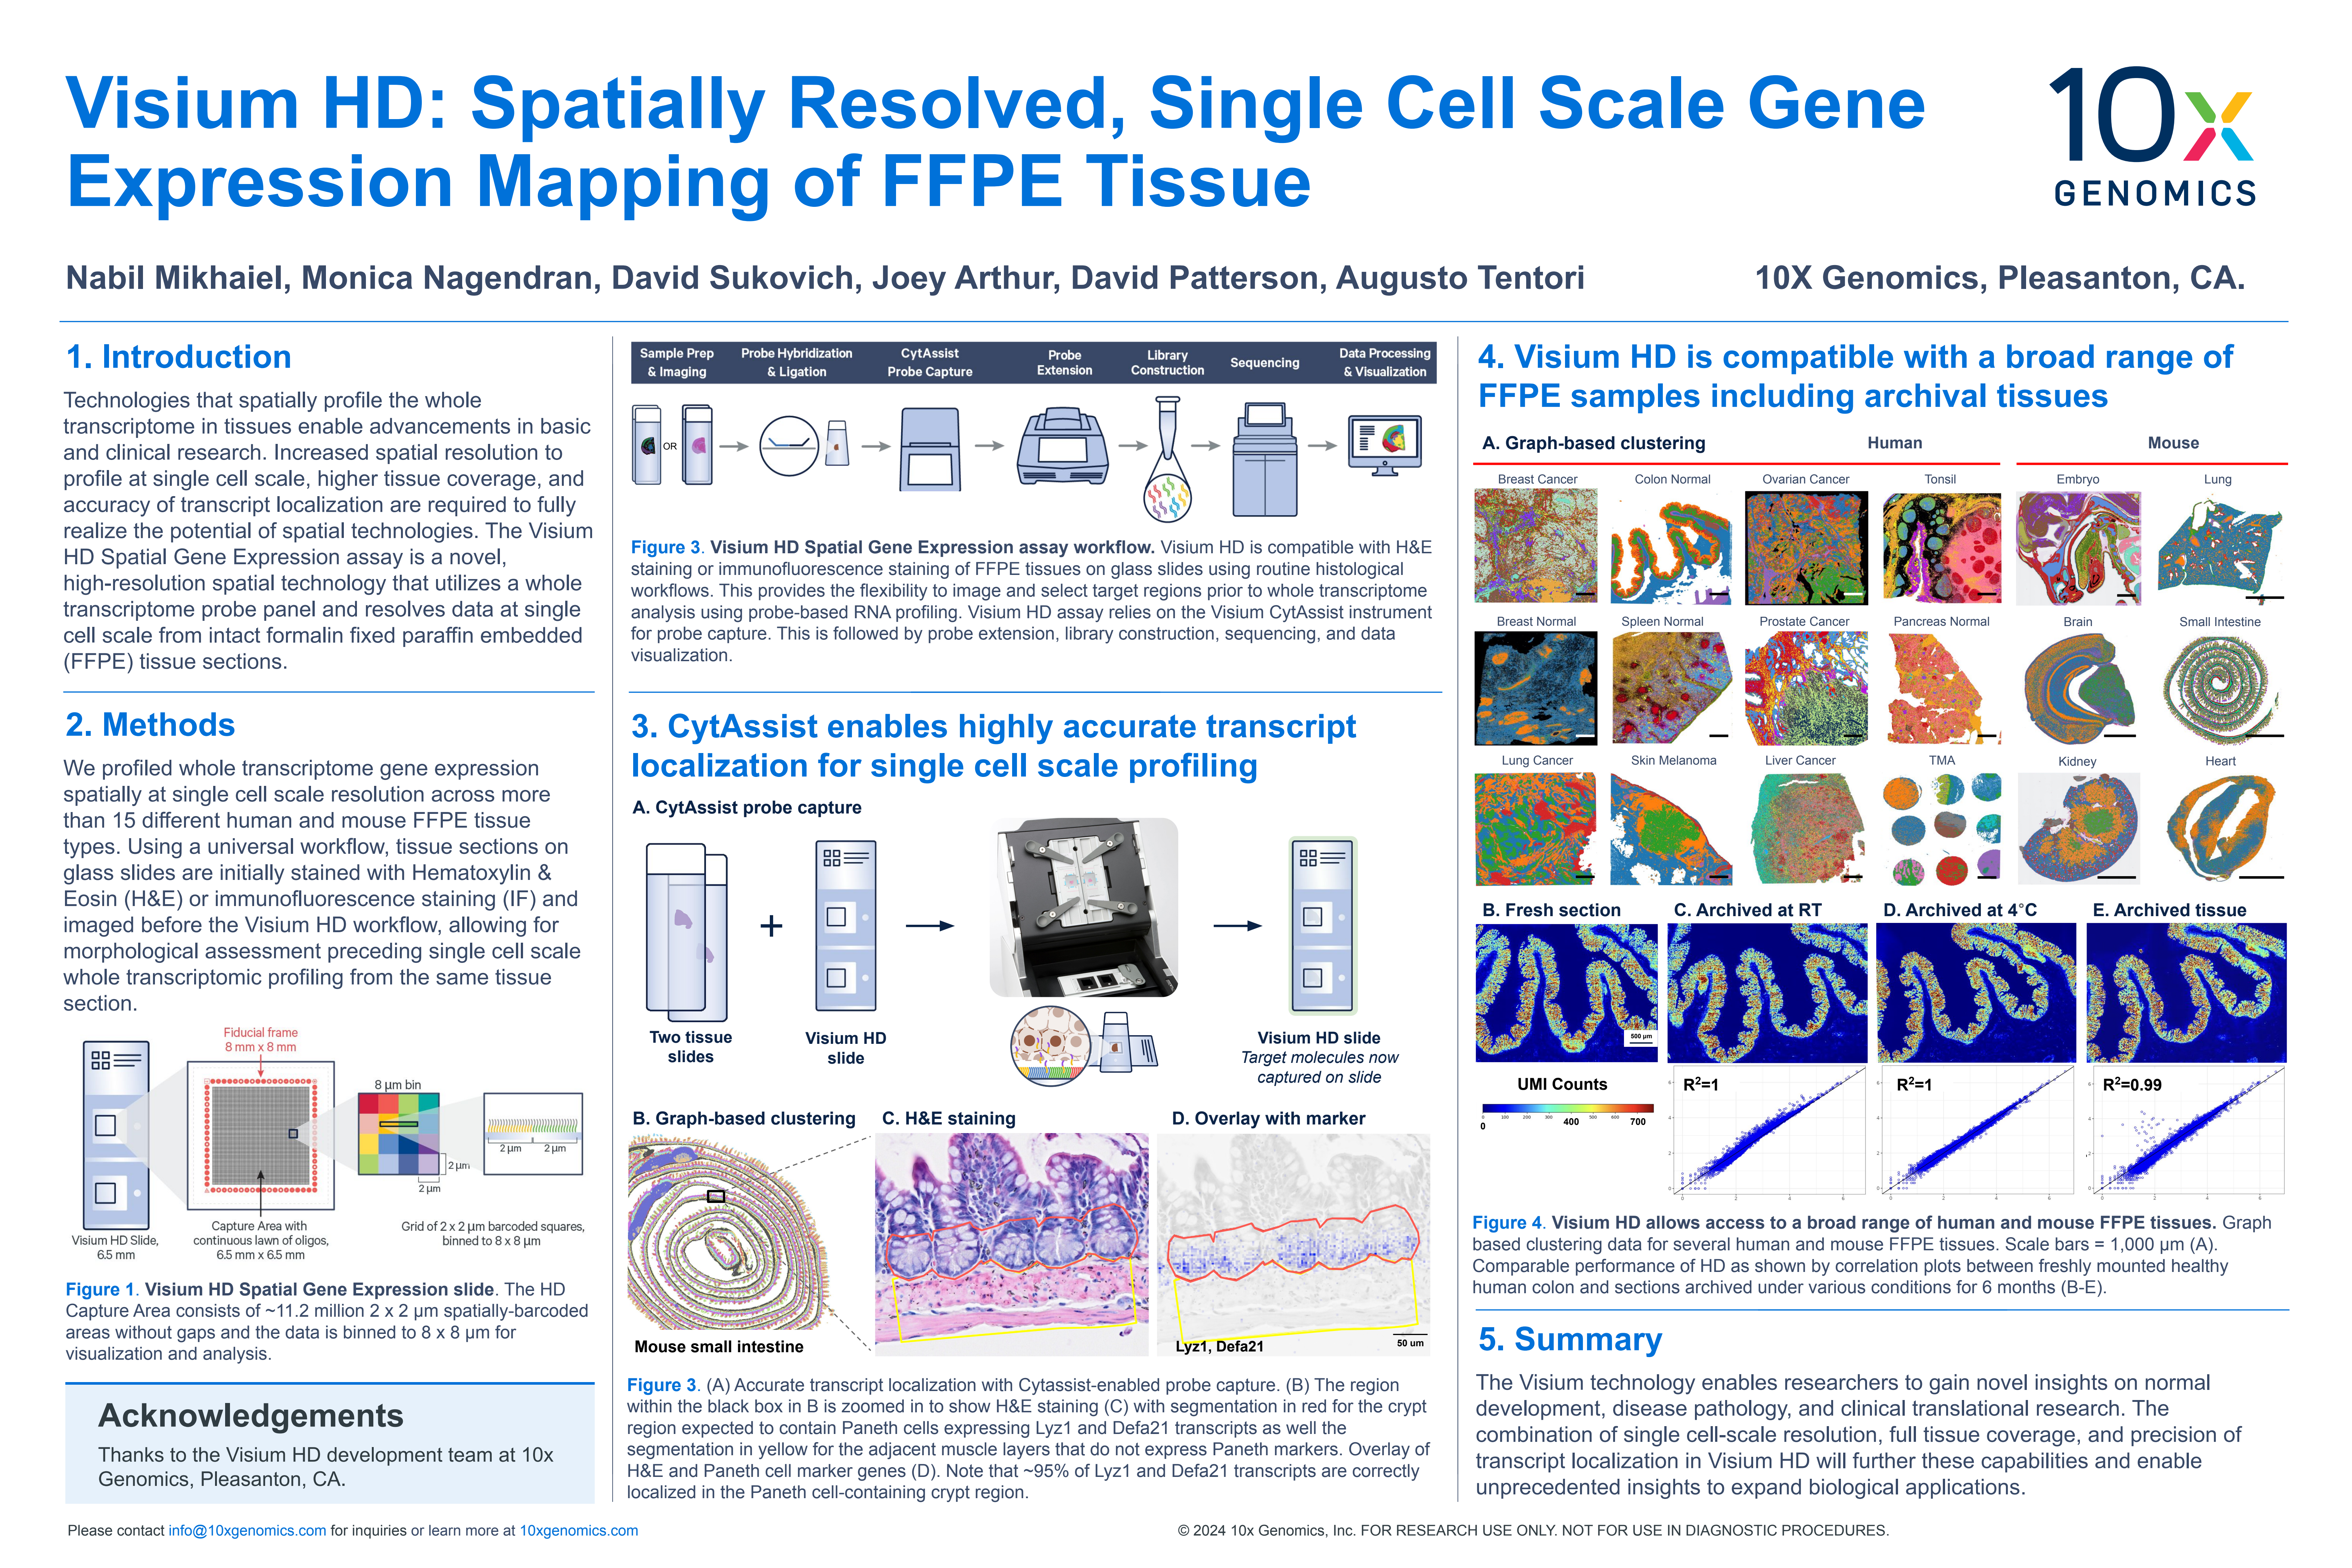 Visium HD: Spatially Resolved, Single Cell Scale Gene Expression Mapping of FFPE Tissue